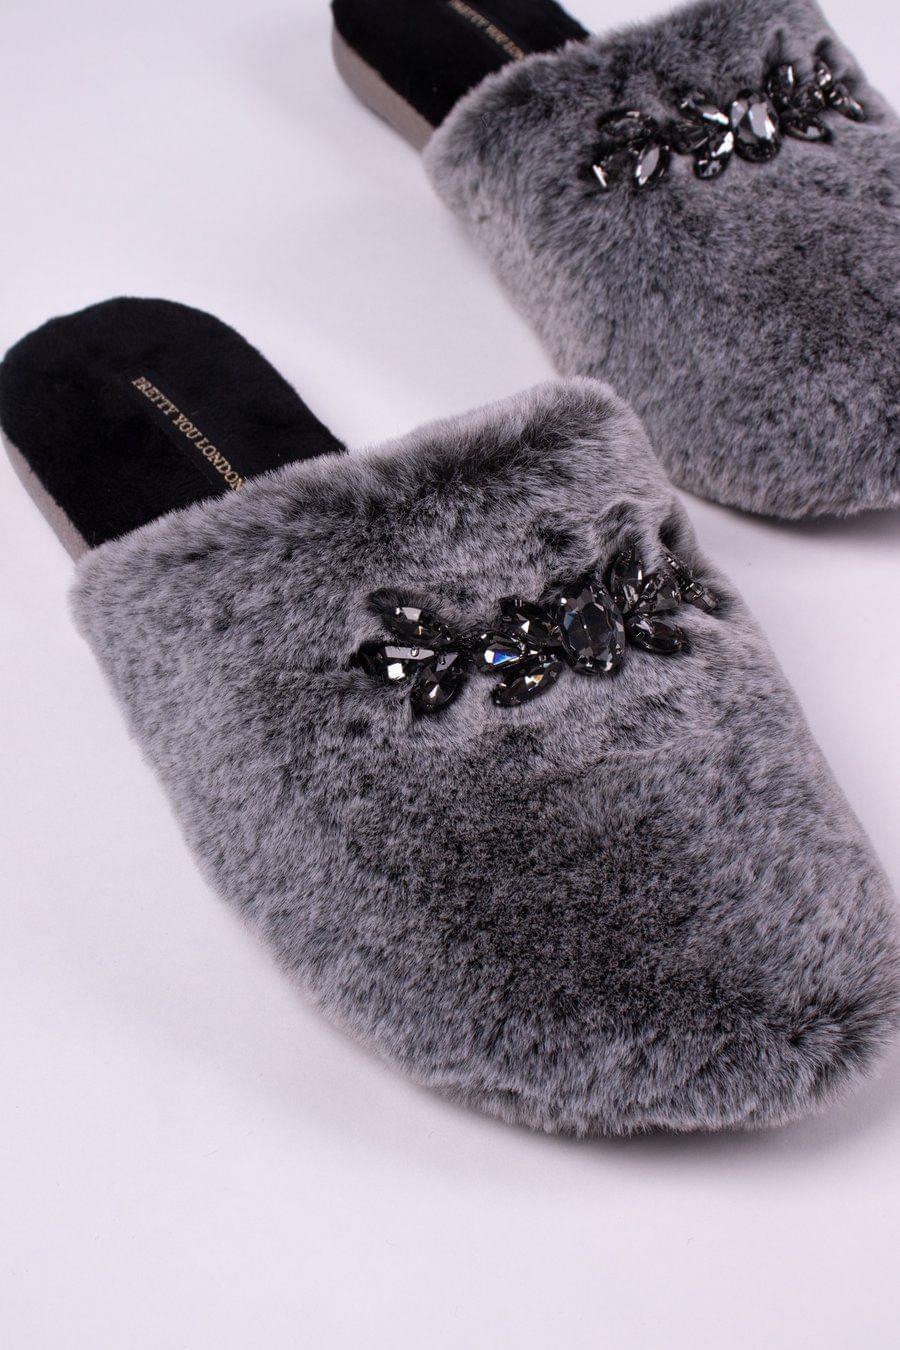 Dido Slippers in Black